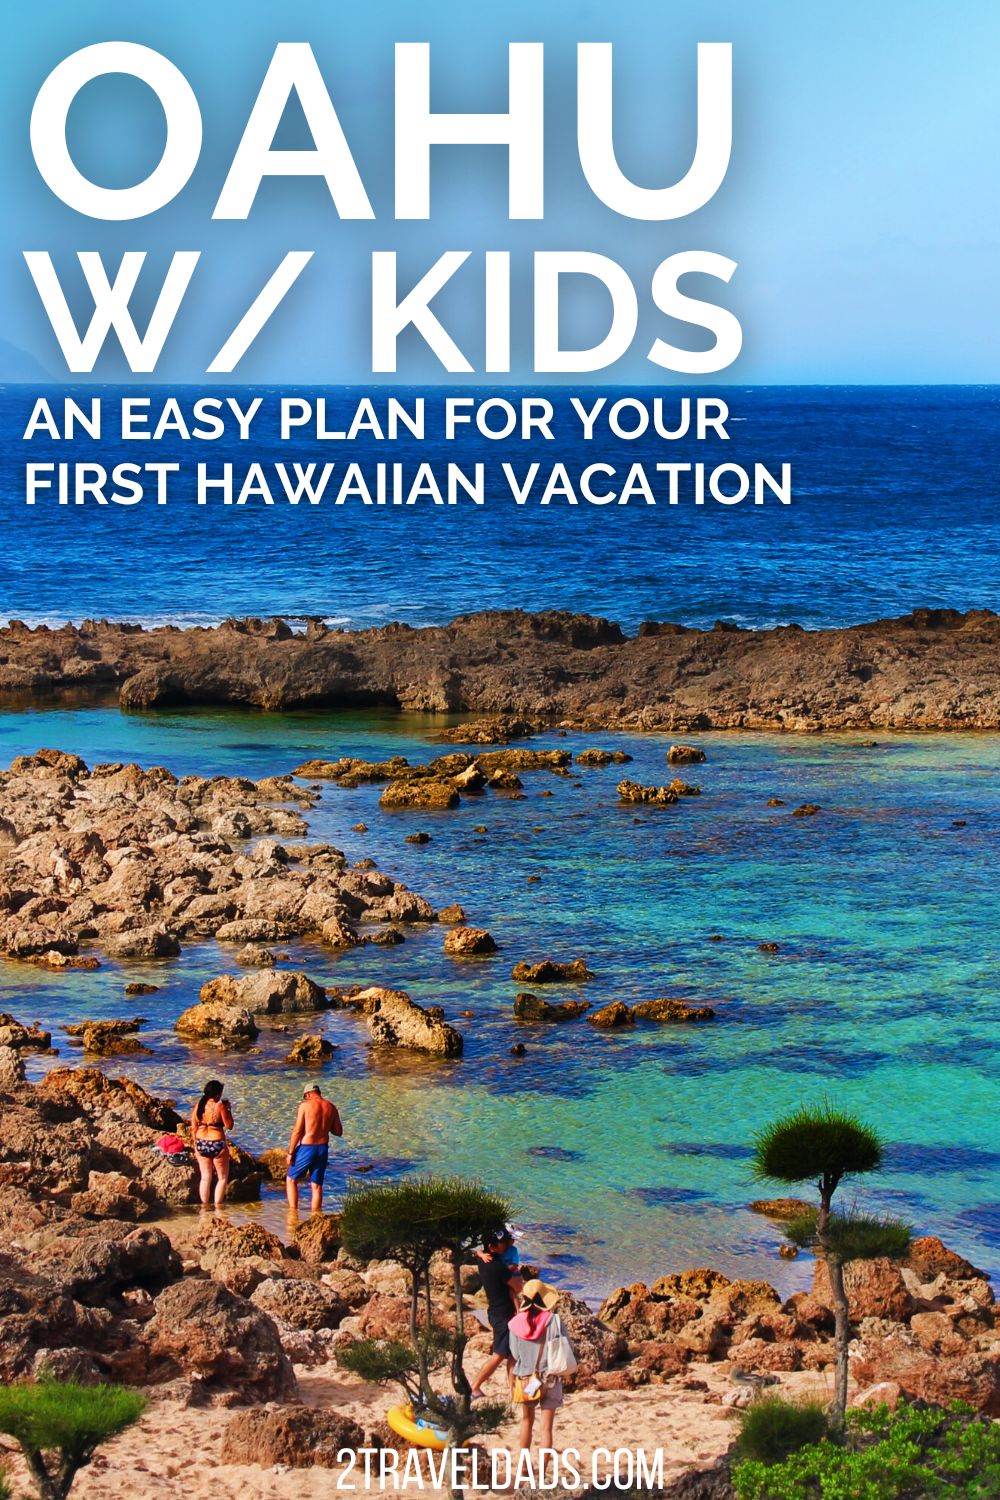 Oahu with kids is a great family vacation. While it's one of the most expensive destinations to travel to with kids, it's beautiful, has unique things to do and you'll enjoy every minute. Tips for planning a stress-free trip to Oahu with kids and budget friendly ideas.